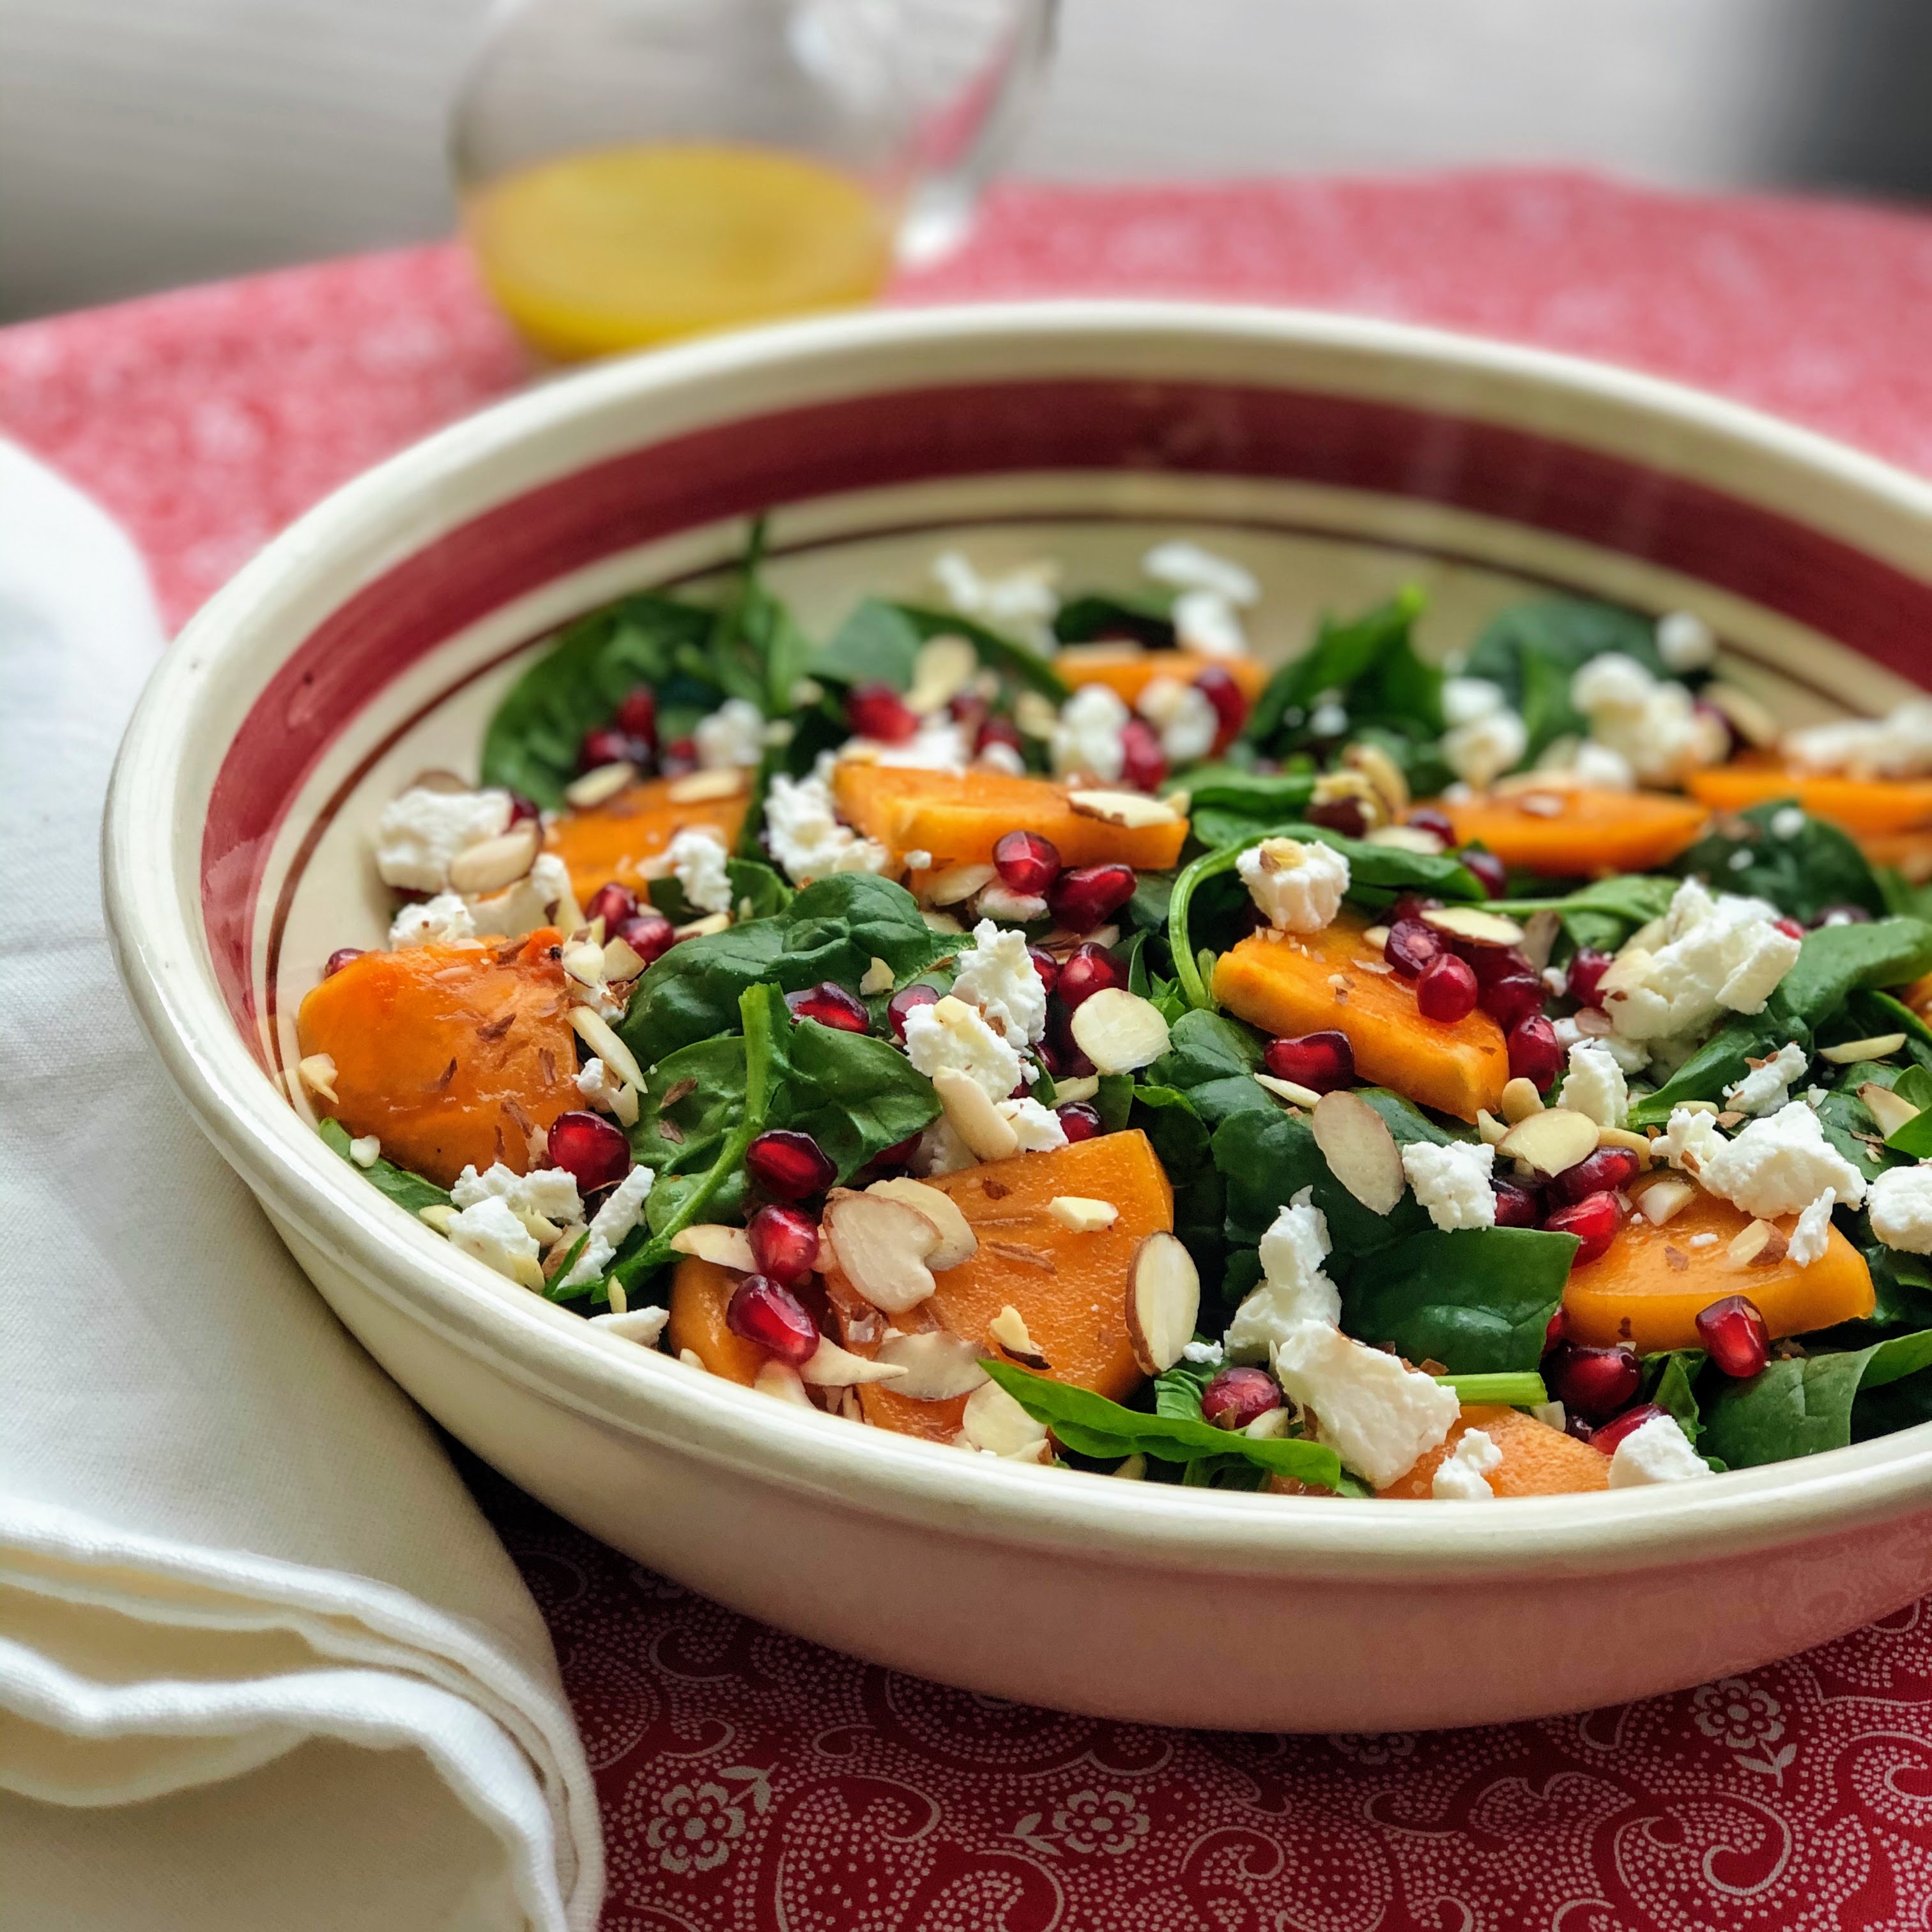 Spinach and Persimmon Salad with Goat Cheese and Pomegranate